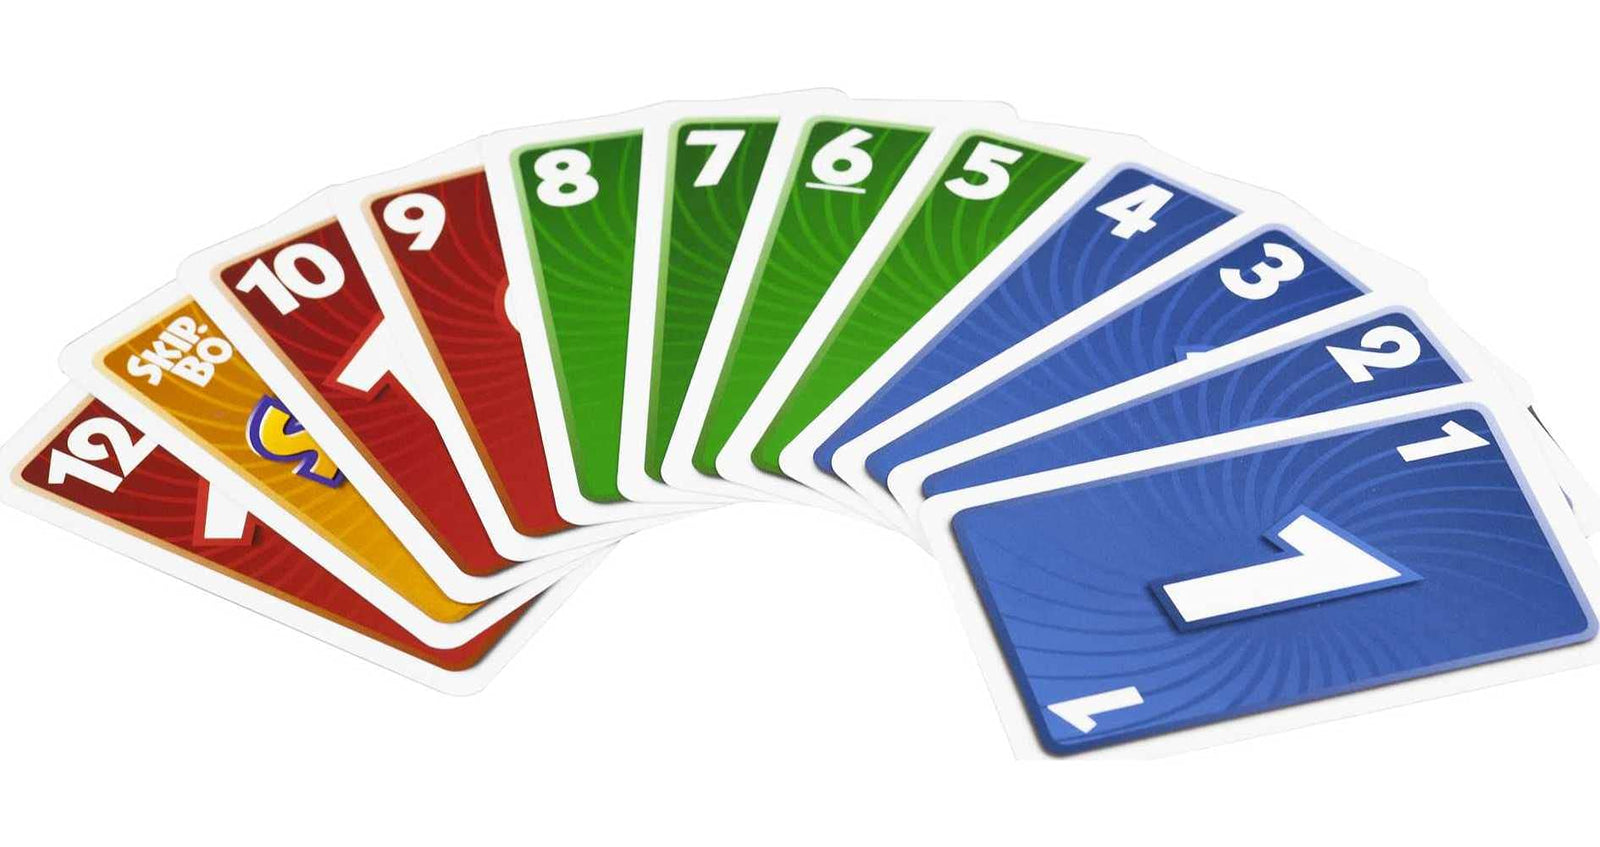 Skip Bo Card Game in Decorative Tin with 162 Cards, Sequencing Family Game for 2 to 6 Players, Kids Gift for Ages 7 Years & Older [Amazon Exclusive]